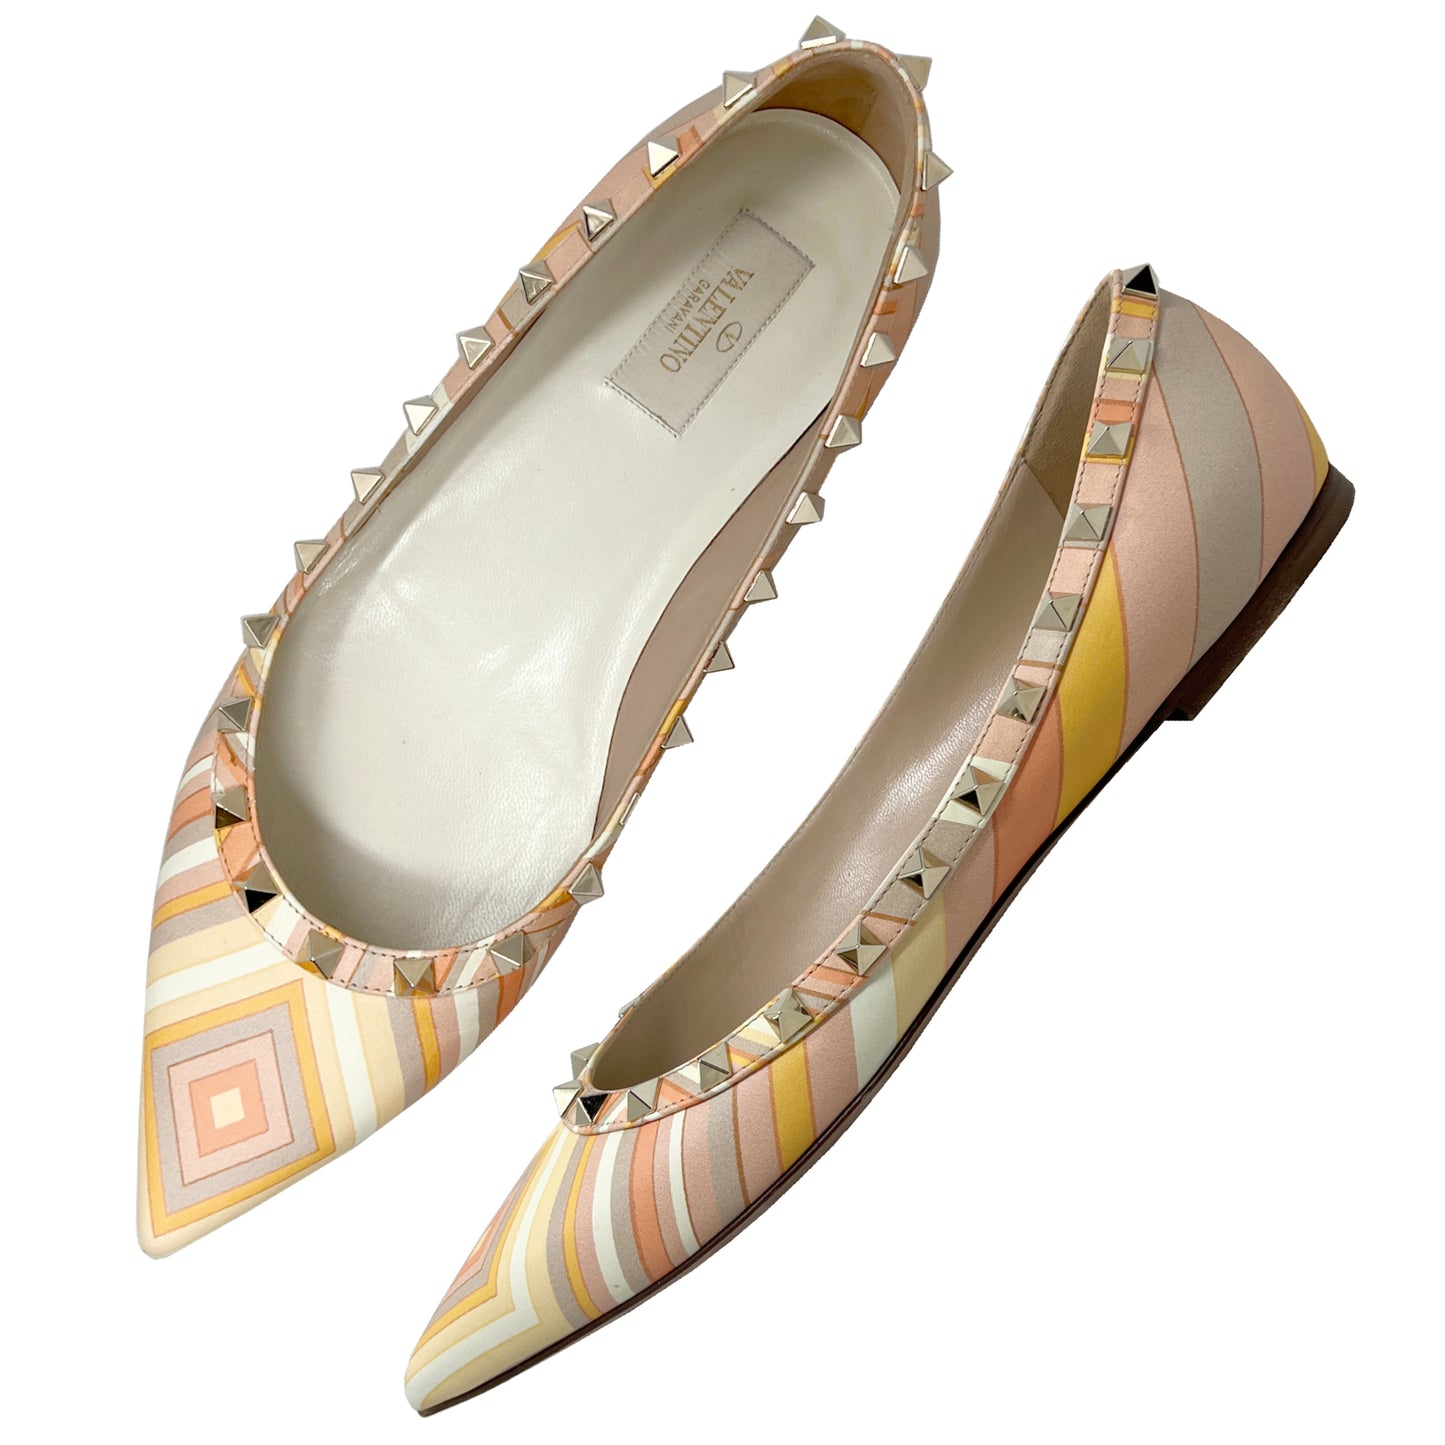 Valentino Rockstud Navajo Striped Leather Studded Multicolor Pointed Toe Flats Size EU 40.5